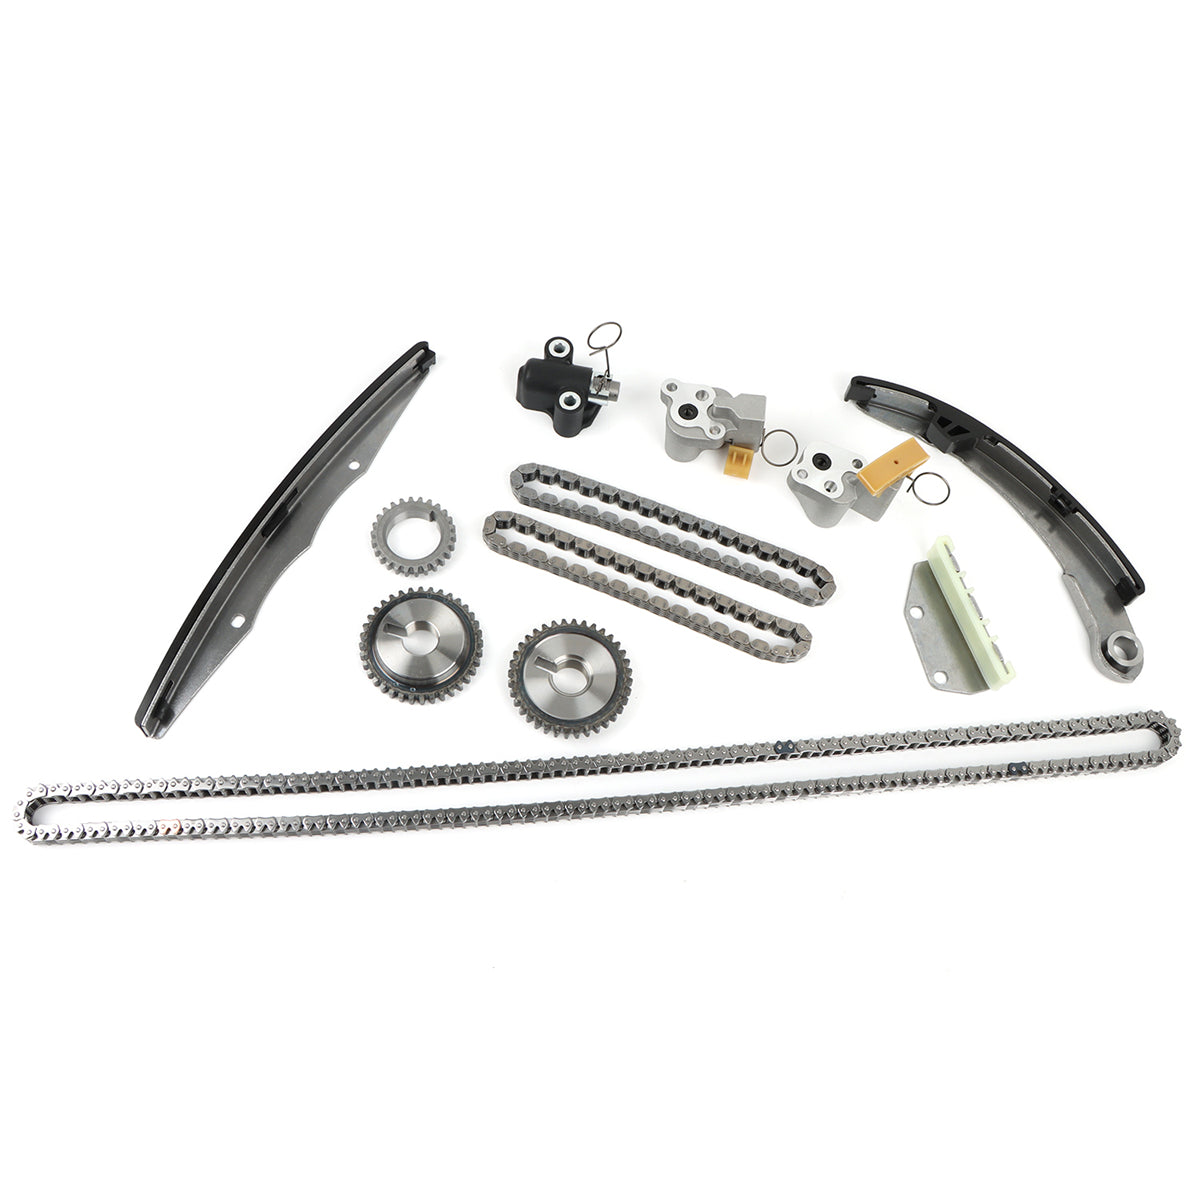 Timing Chain Kit 13028-ZK01C, Daysyore Timing Chain Kit, Timing Chain Kit for 2005- 2015, Timing Chain Kit for Nissan Xterra/Frontier/Pathfinder, Auto Timing Chain Kit , Car Timing Chain Kit